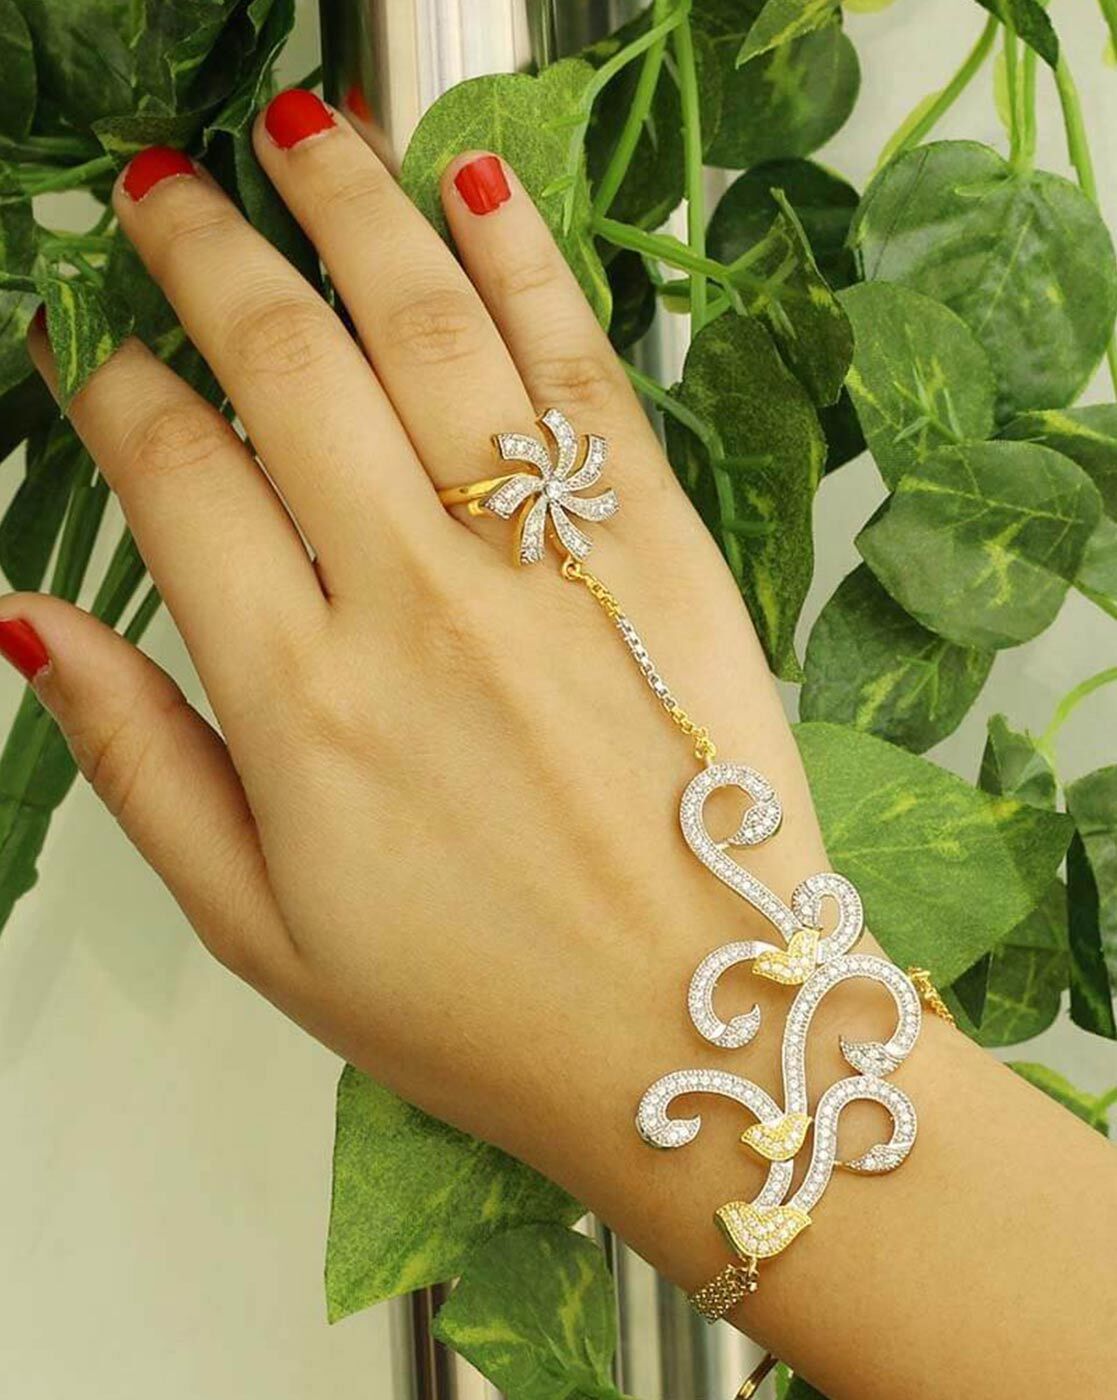 Buy WomenSky Stylish Single Hand Gold Plated Hath Phool/Hand Thong Crystal  Bracelet With Finger Ring for Women and Girls at Amazon.in